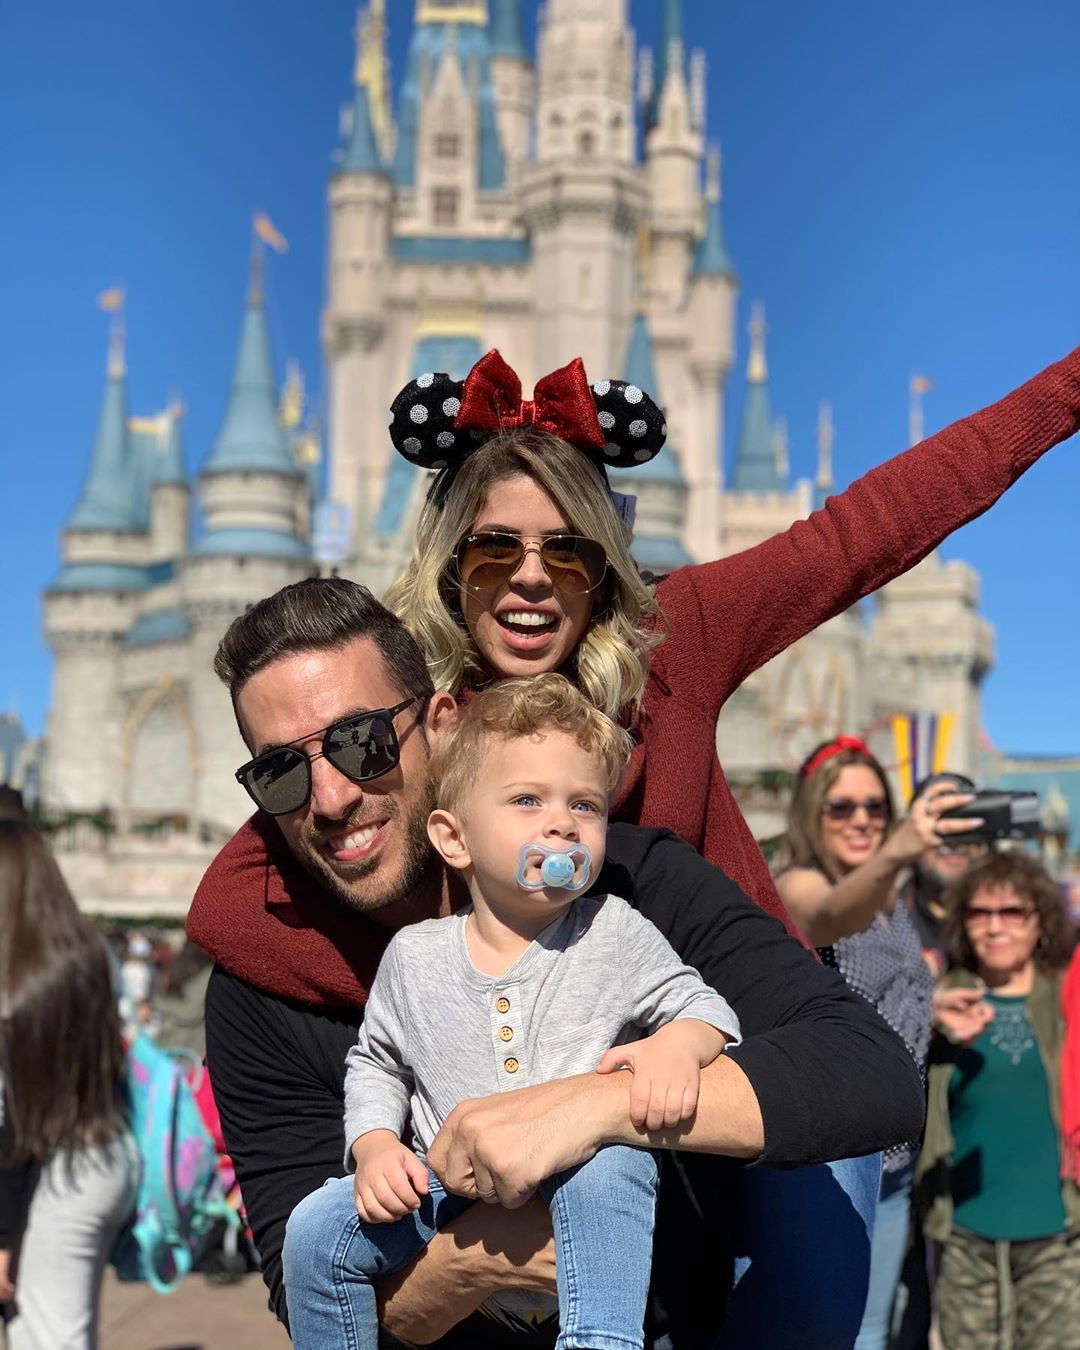 Family posing in front of castle at Disney World. Photo by Instagram user @sallyderogatis